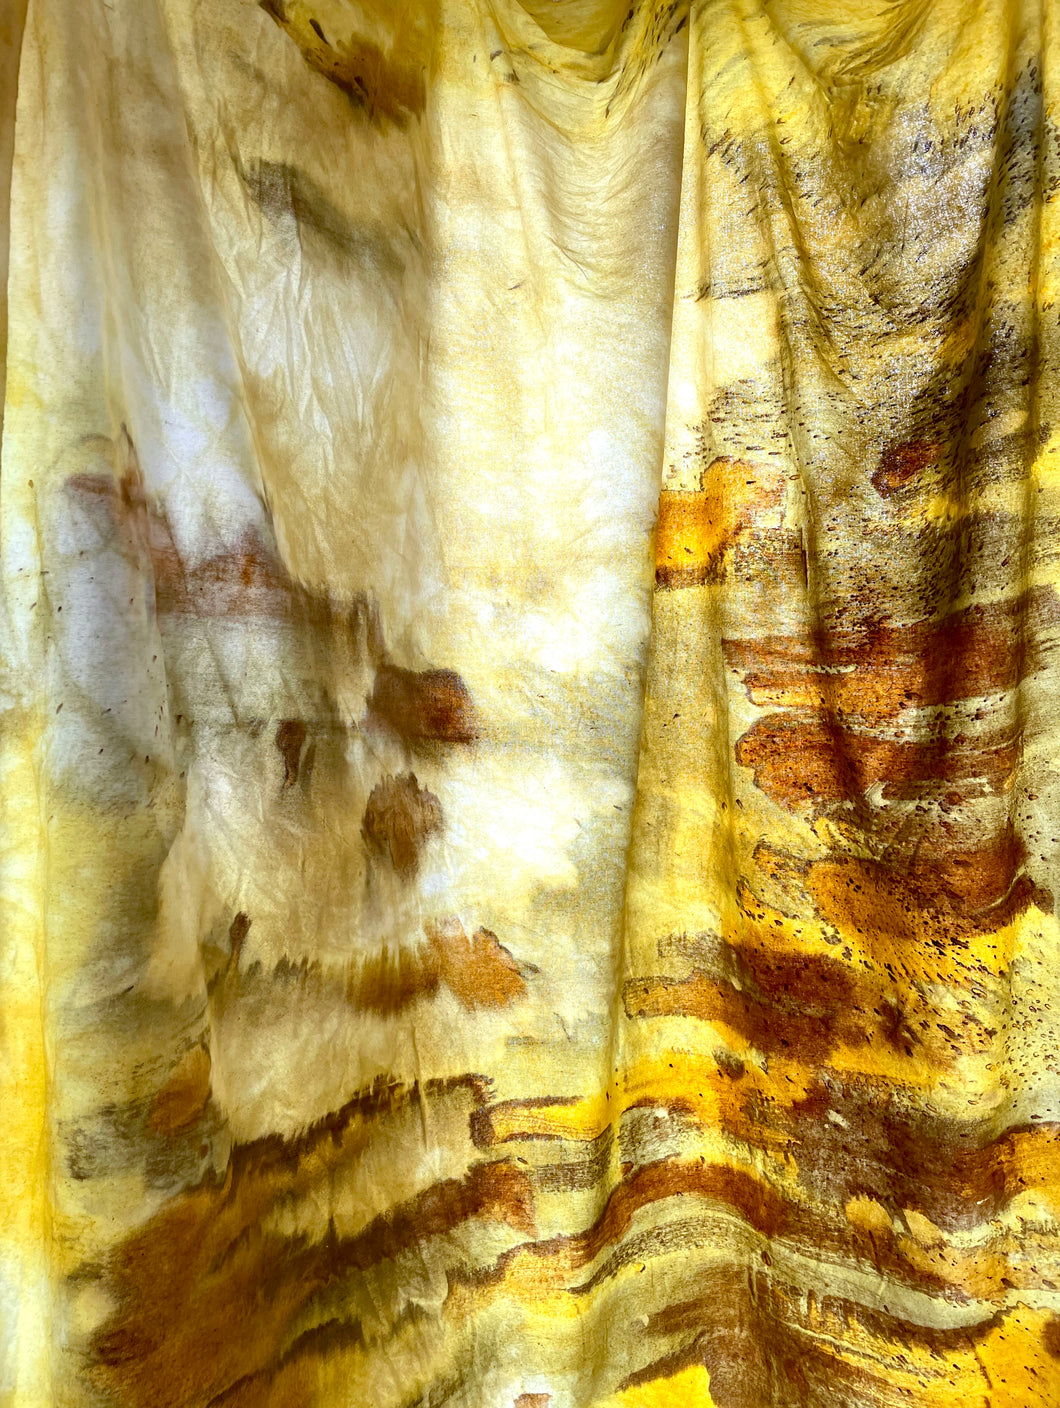 painting with pH - natural dyes virtual workshop - may 22 & 23 2021